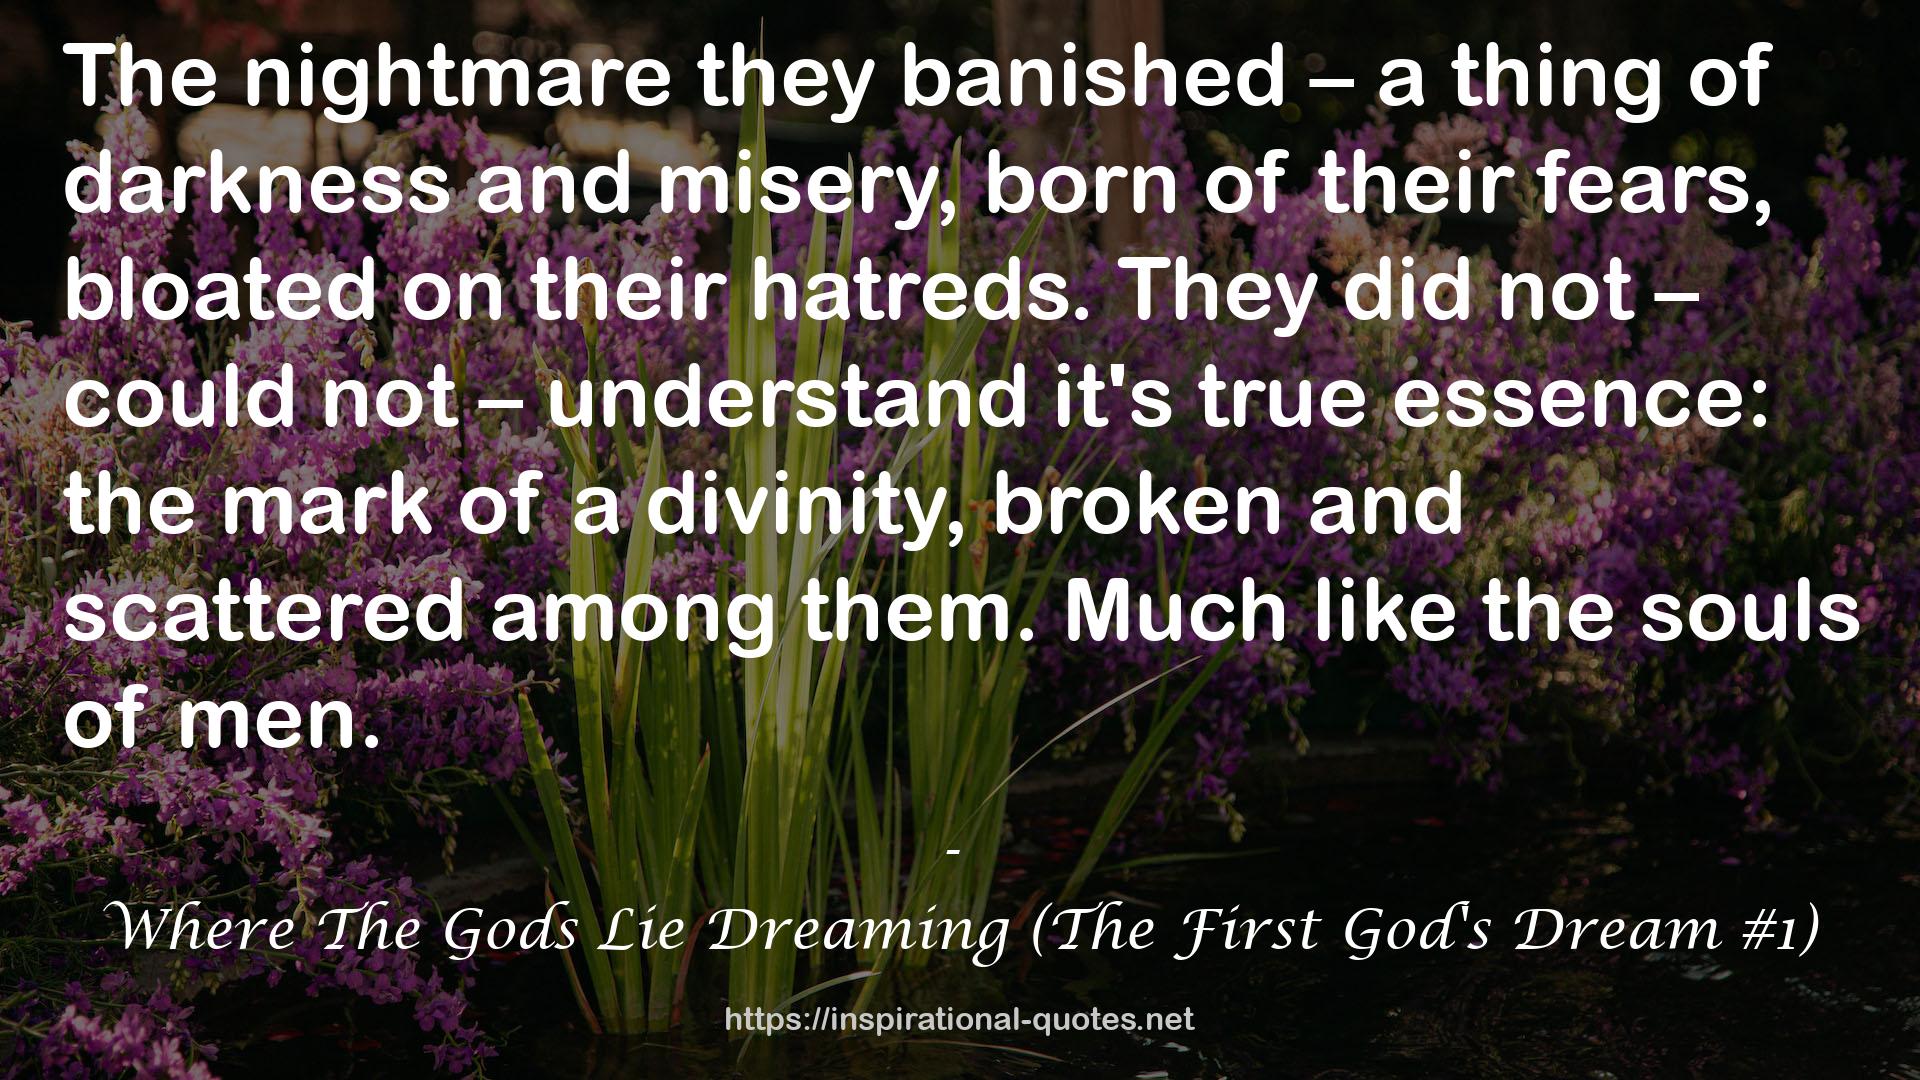 Where The Gods Lie Dreaming (The First God's Dream #1) QUOTES